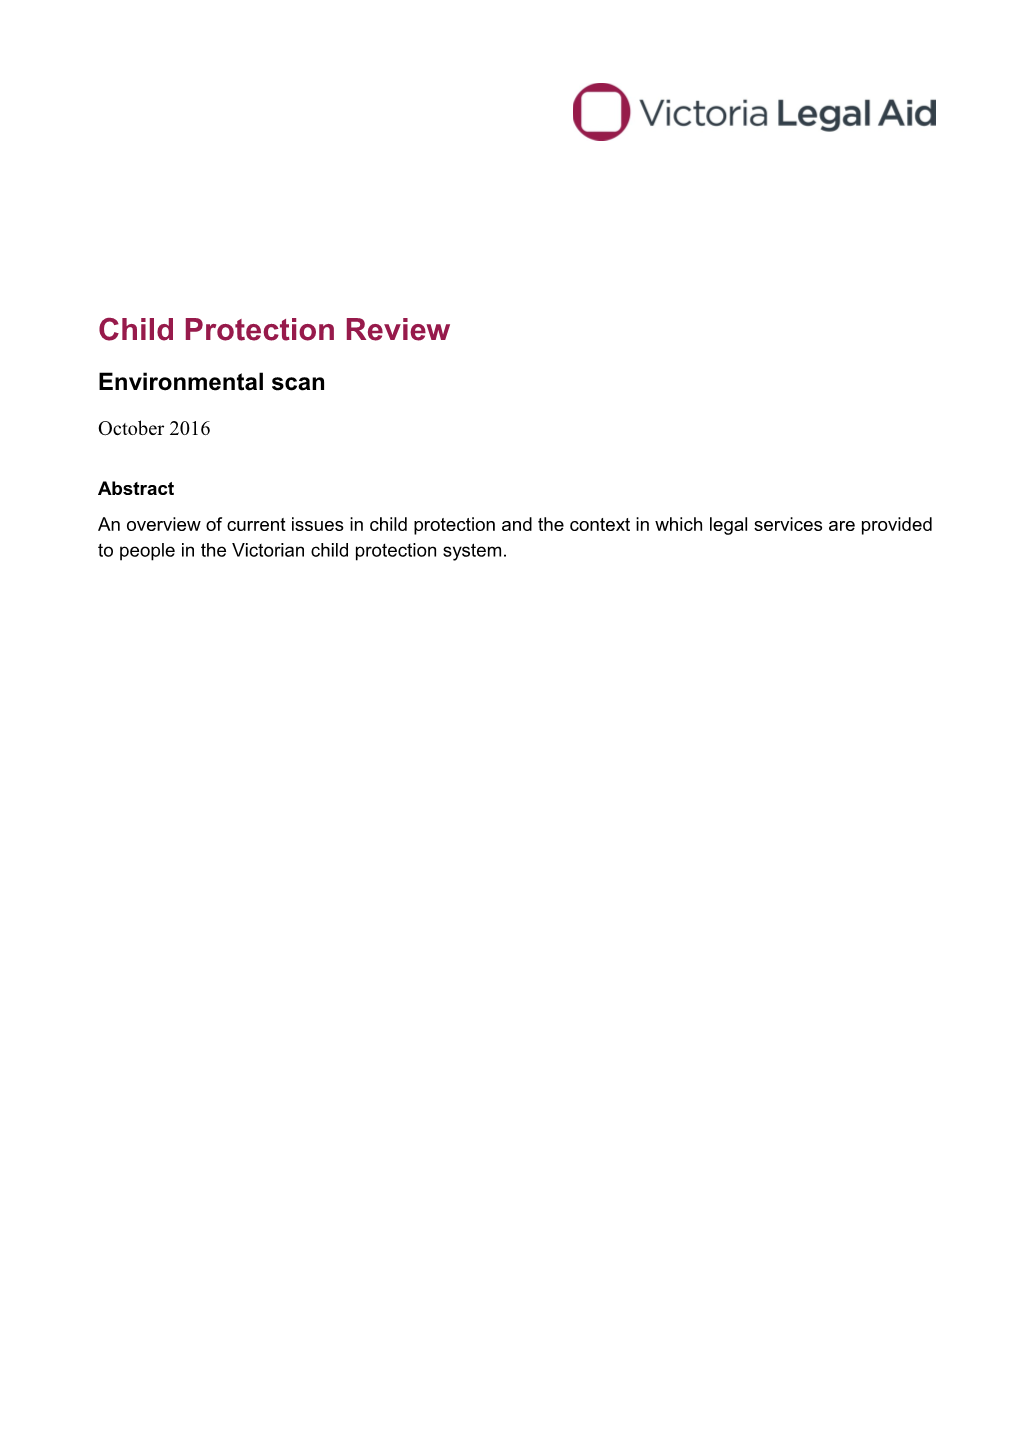 Child Protection Review Environmental Scan